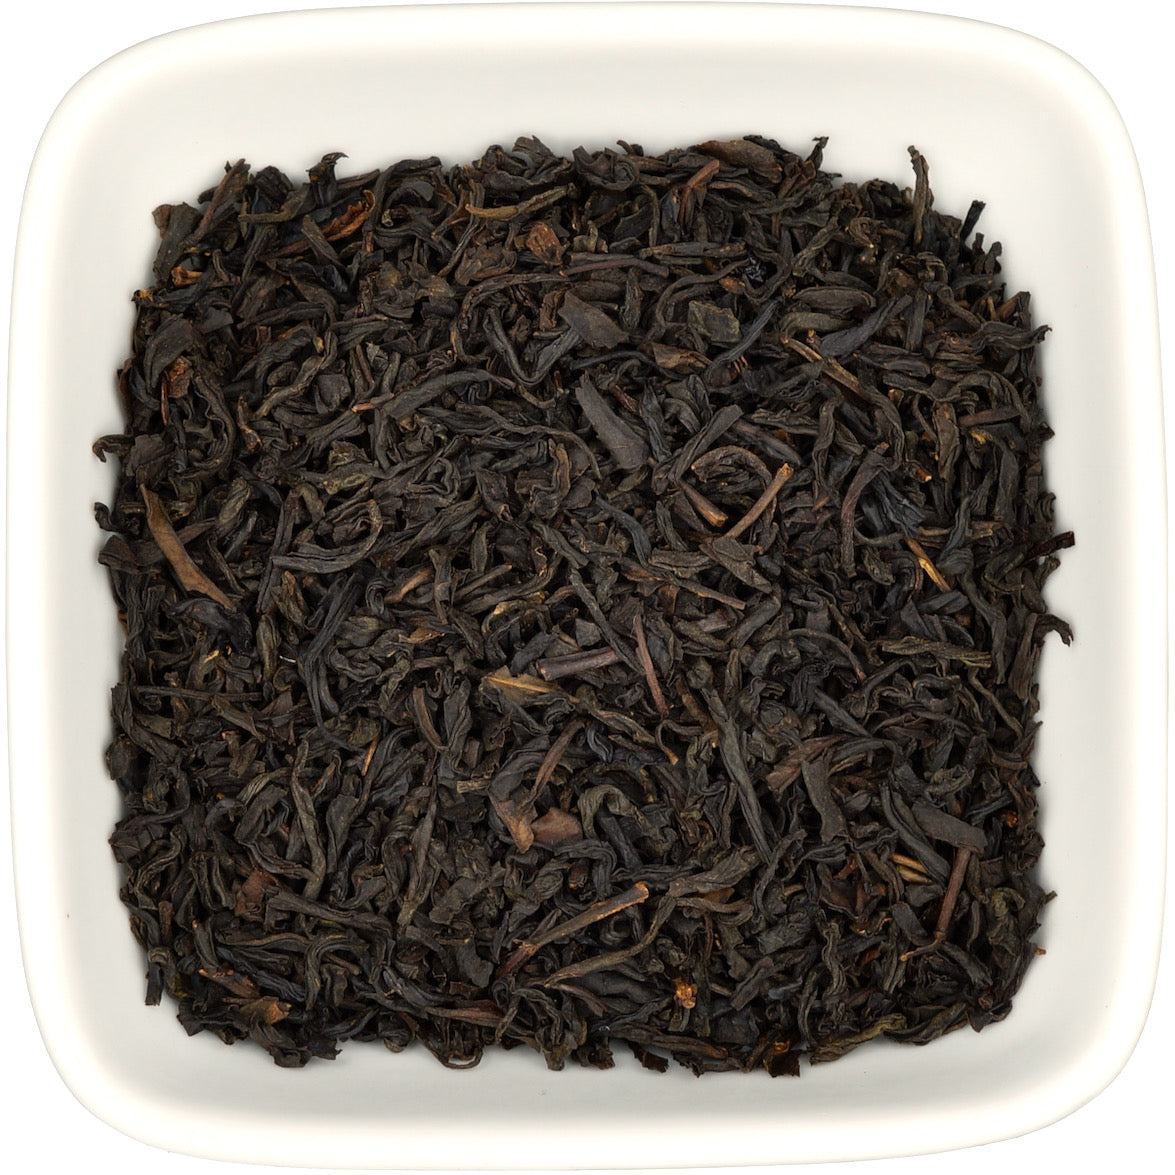 Lapsang Souchong dry leaf view